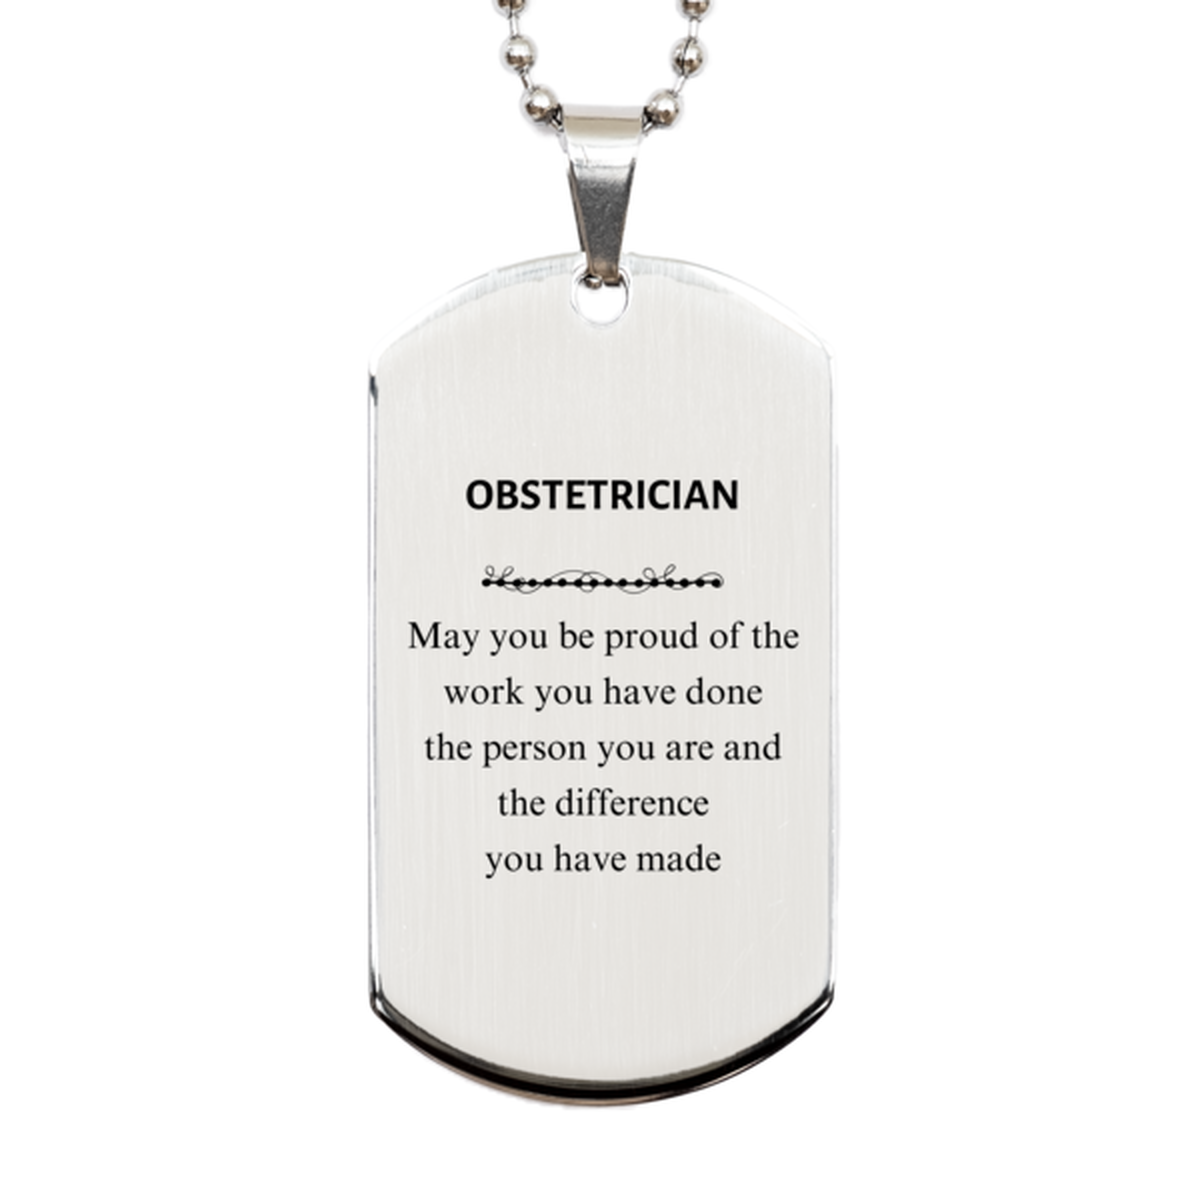 Obstetrician May you be proud of the work you have done, Retirement Obstetrician Silver Dog Tag for Colleague Appreciation Gifts Amazing for Obstetrician